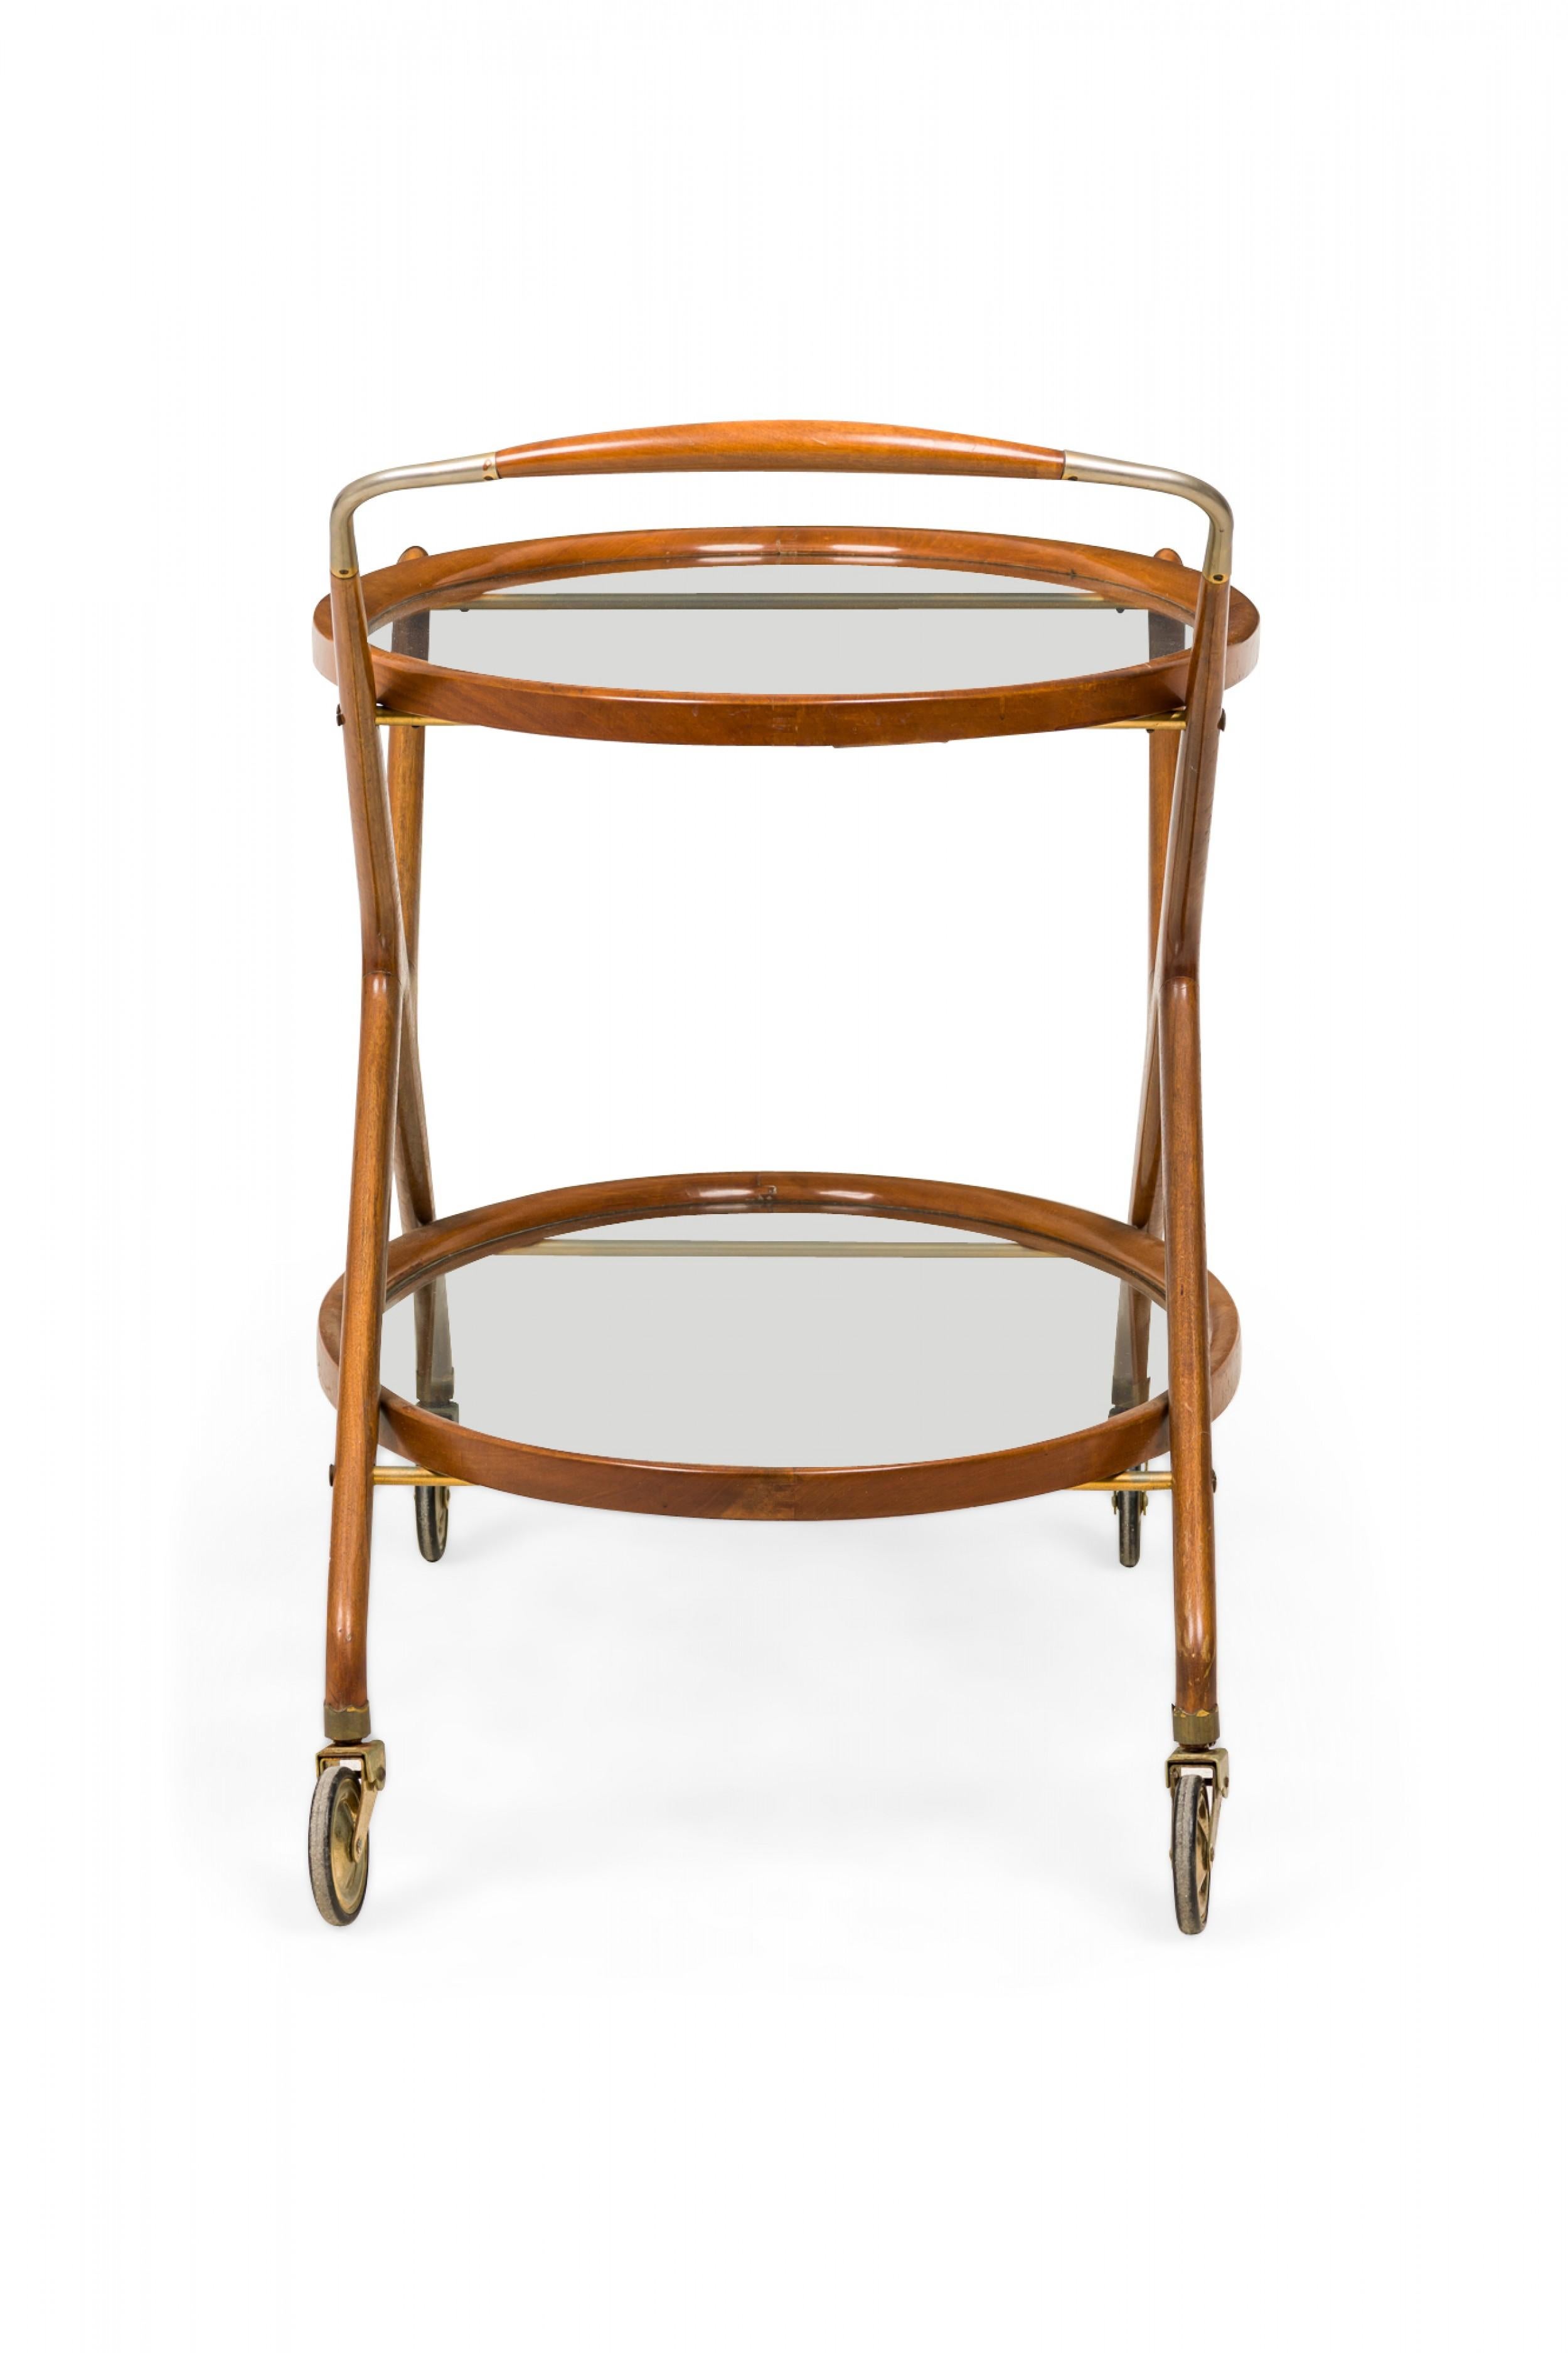 20th Century Cesare Lacca Italian Mid-Century Oval Teak and Brass Serving Trolley Bar Cart